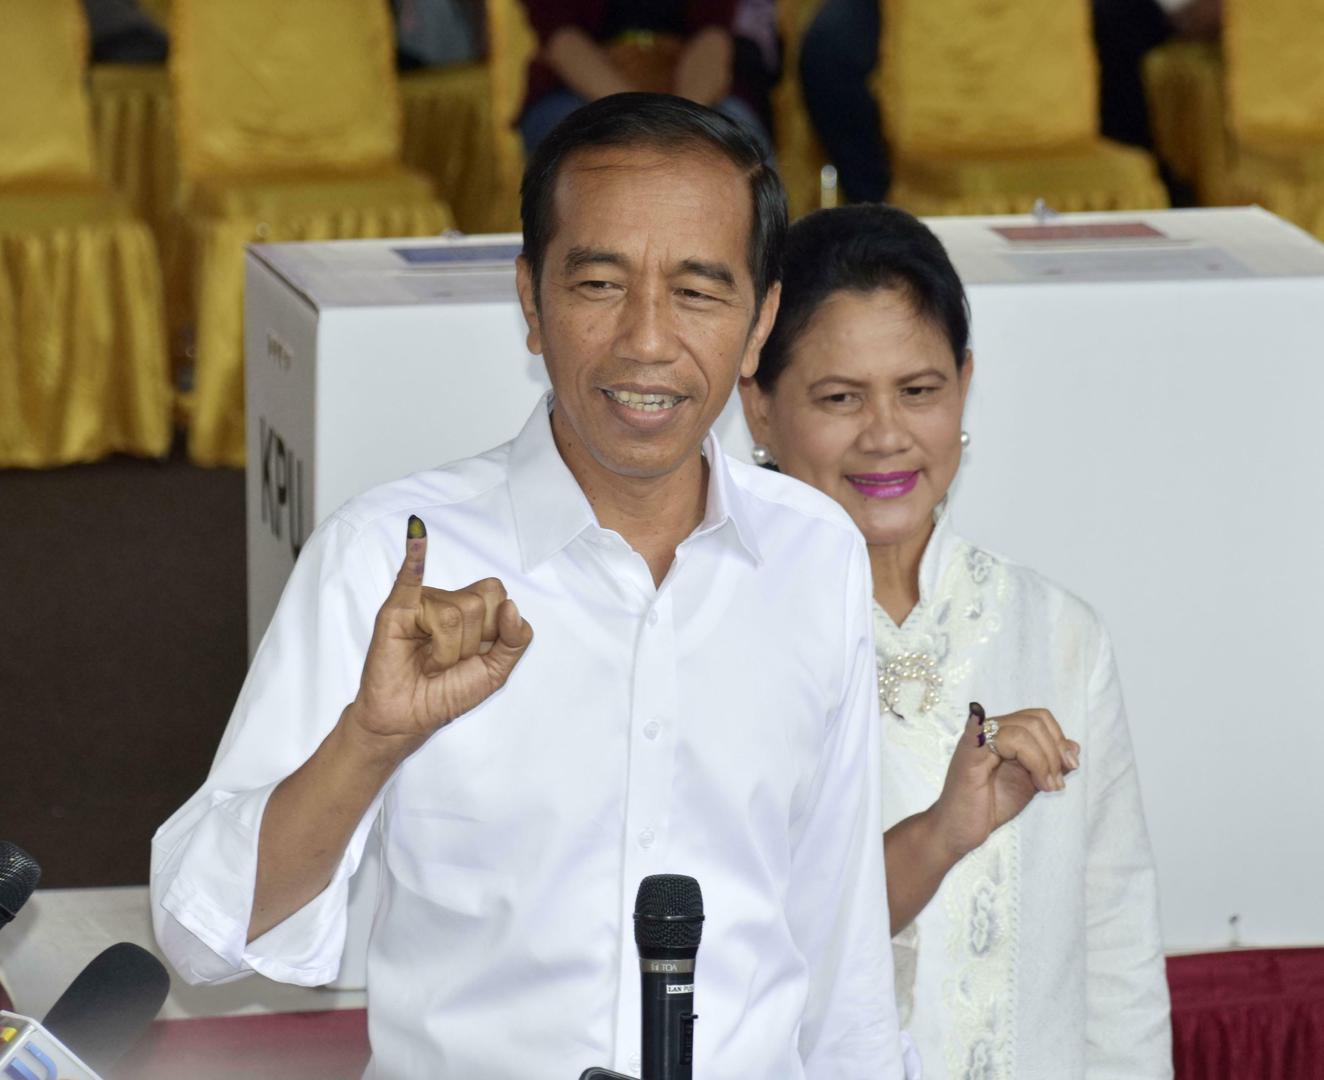 Indonesian President Joko "Jokowi" Widodo and his wife Iriana showing off their ink-marked fingers after casting ballots in the presidential election at a polling station in Jakarta on April 17, 2019. 